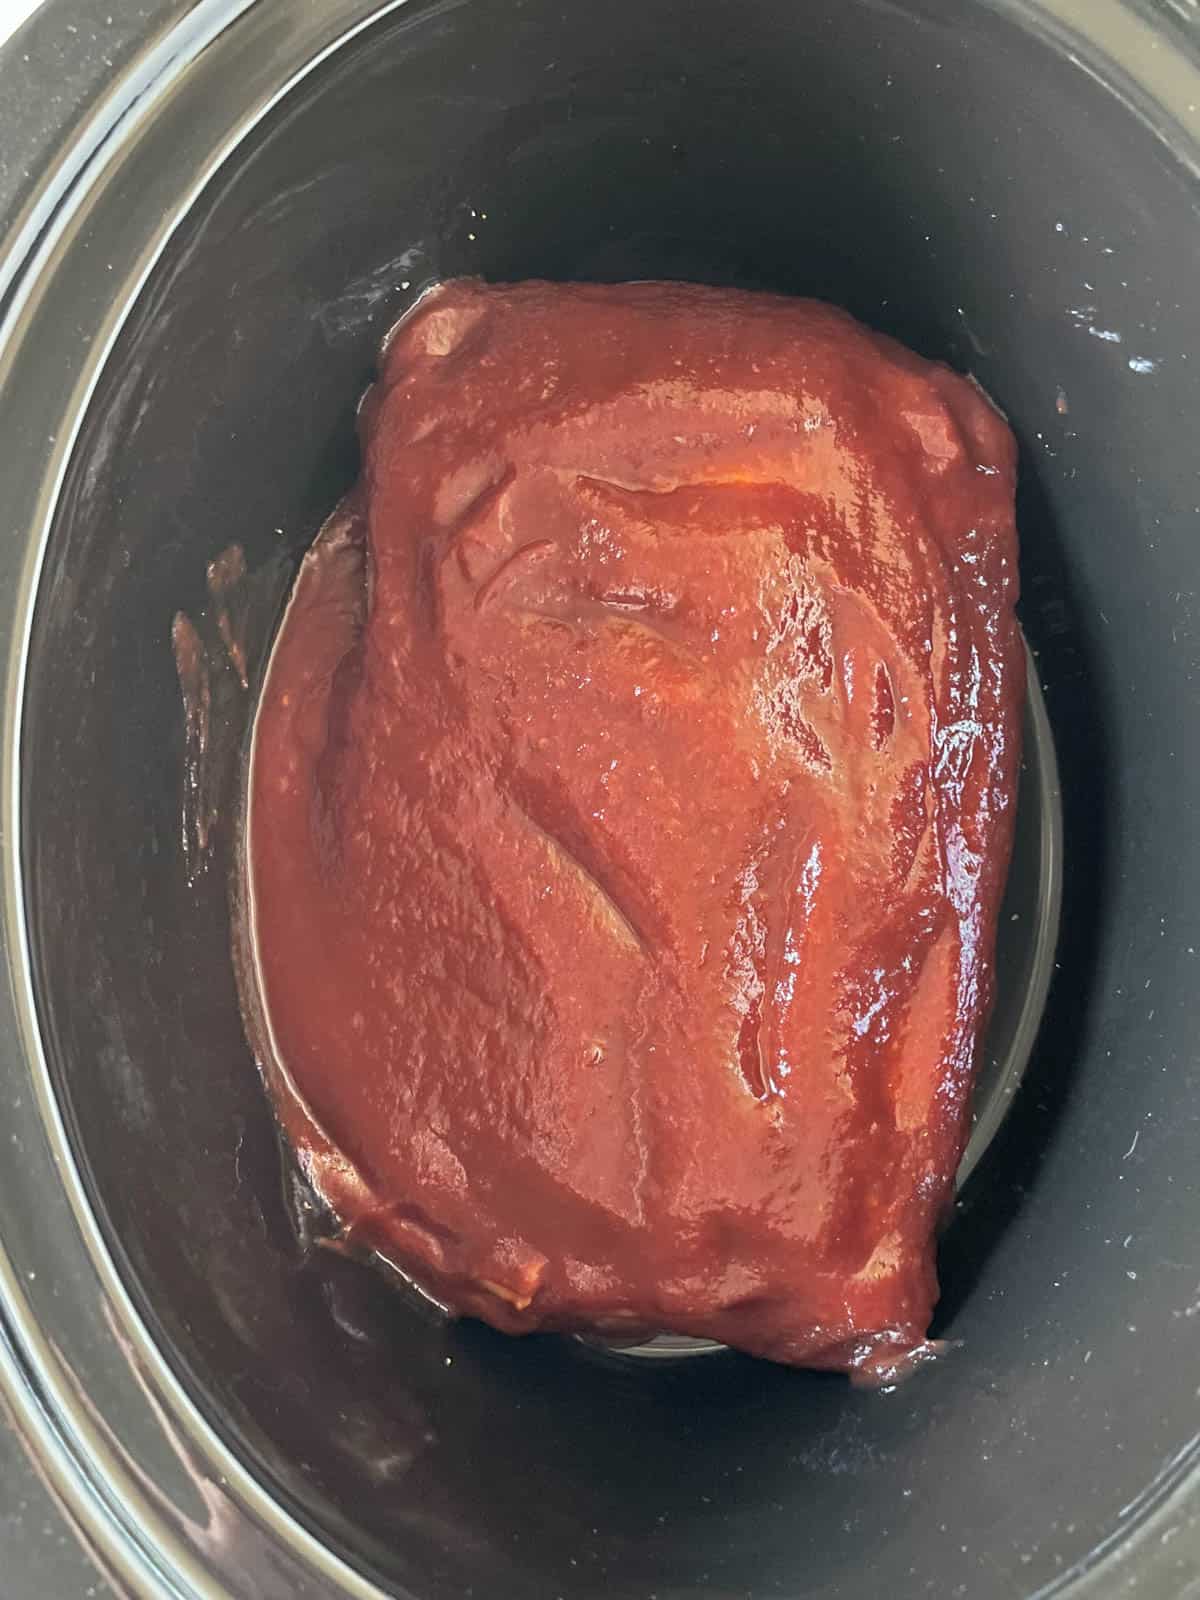 A beef brisket coated in BBQ sauce in a slow cooker.